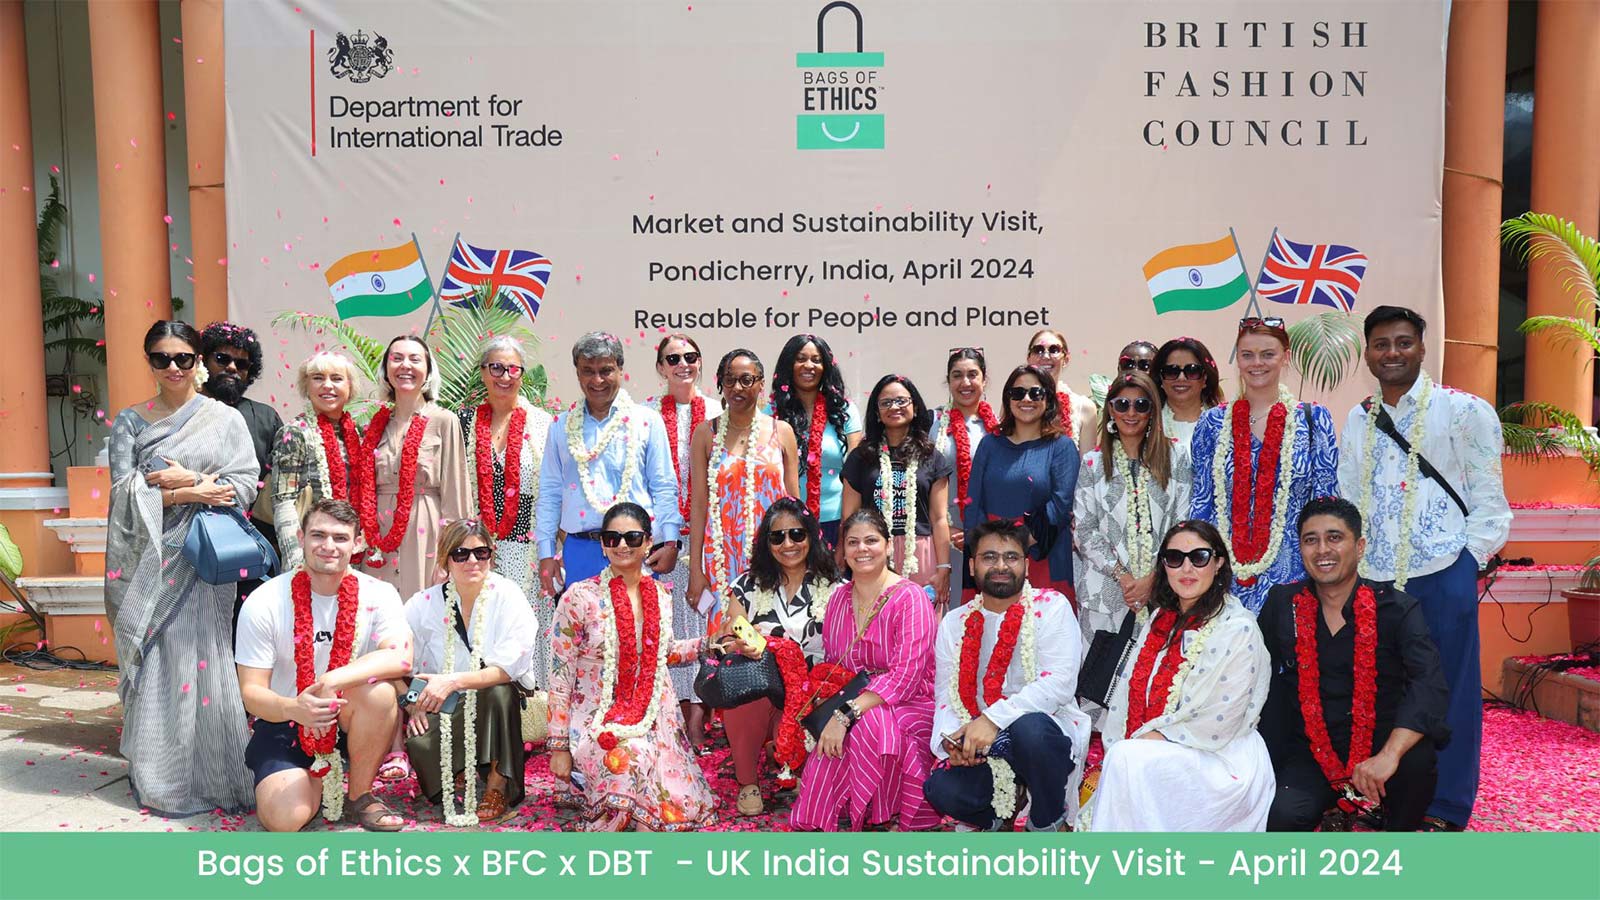 Bags of Ethics x BFC x DBT - UK India Sustainability Visit - April 2024